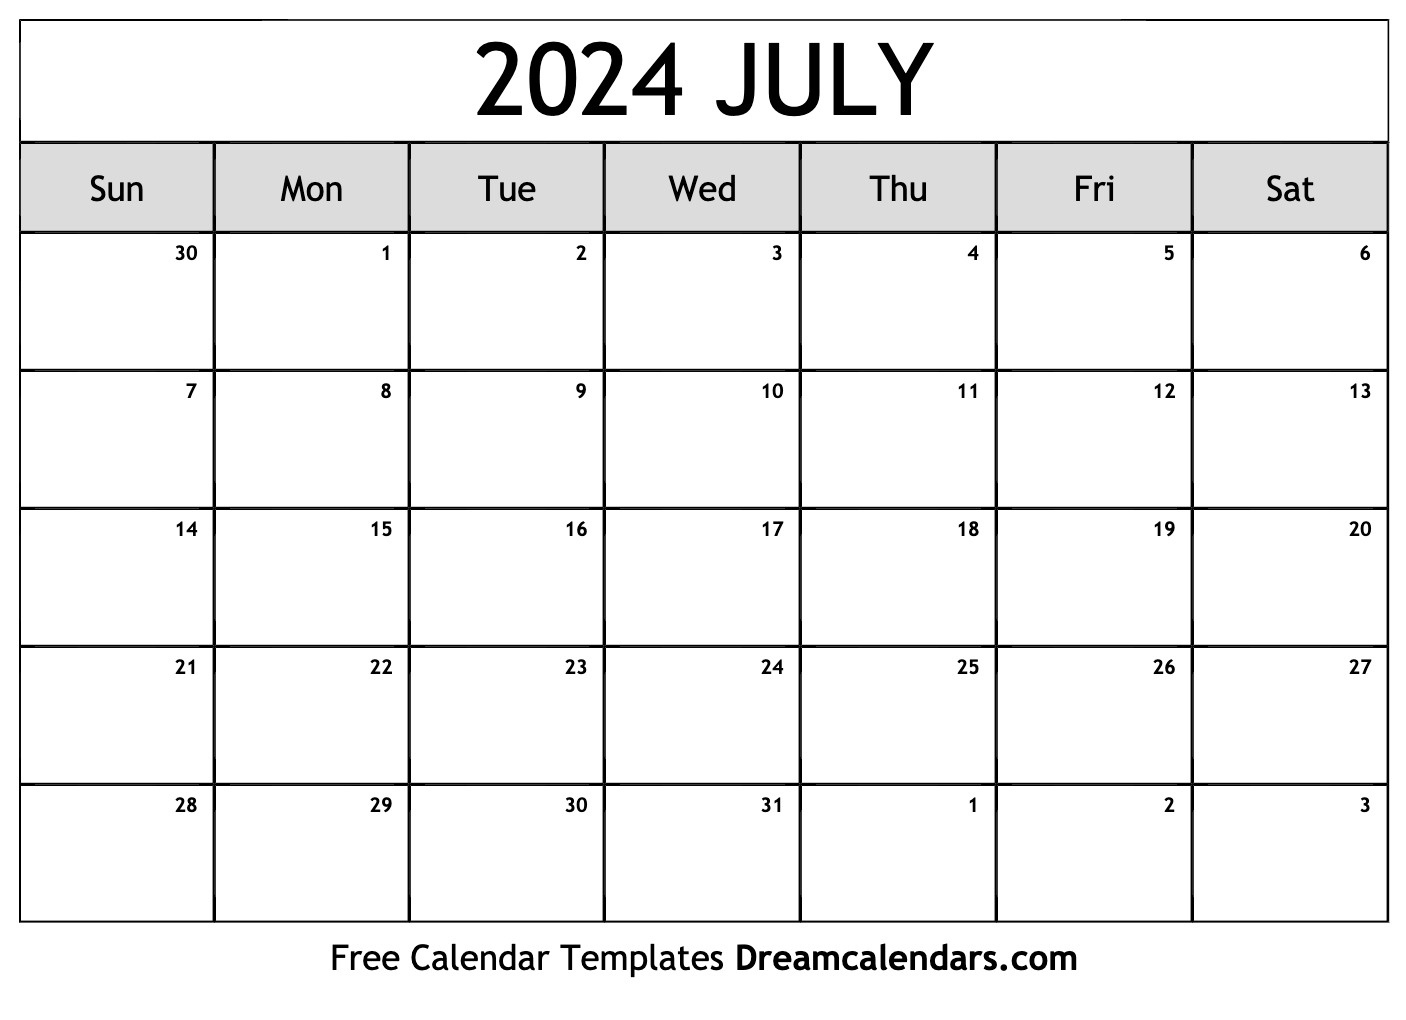 July 2024 Calendar - Free Printable With Holidays And Observances for July in Roman Calendar 2024